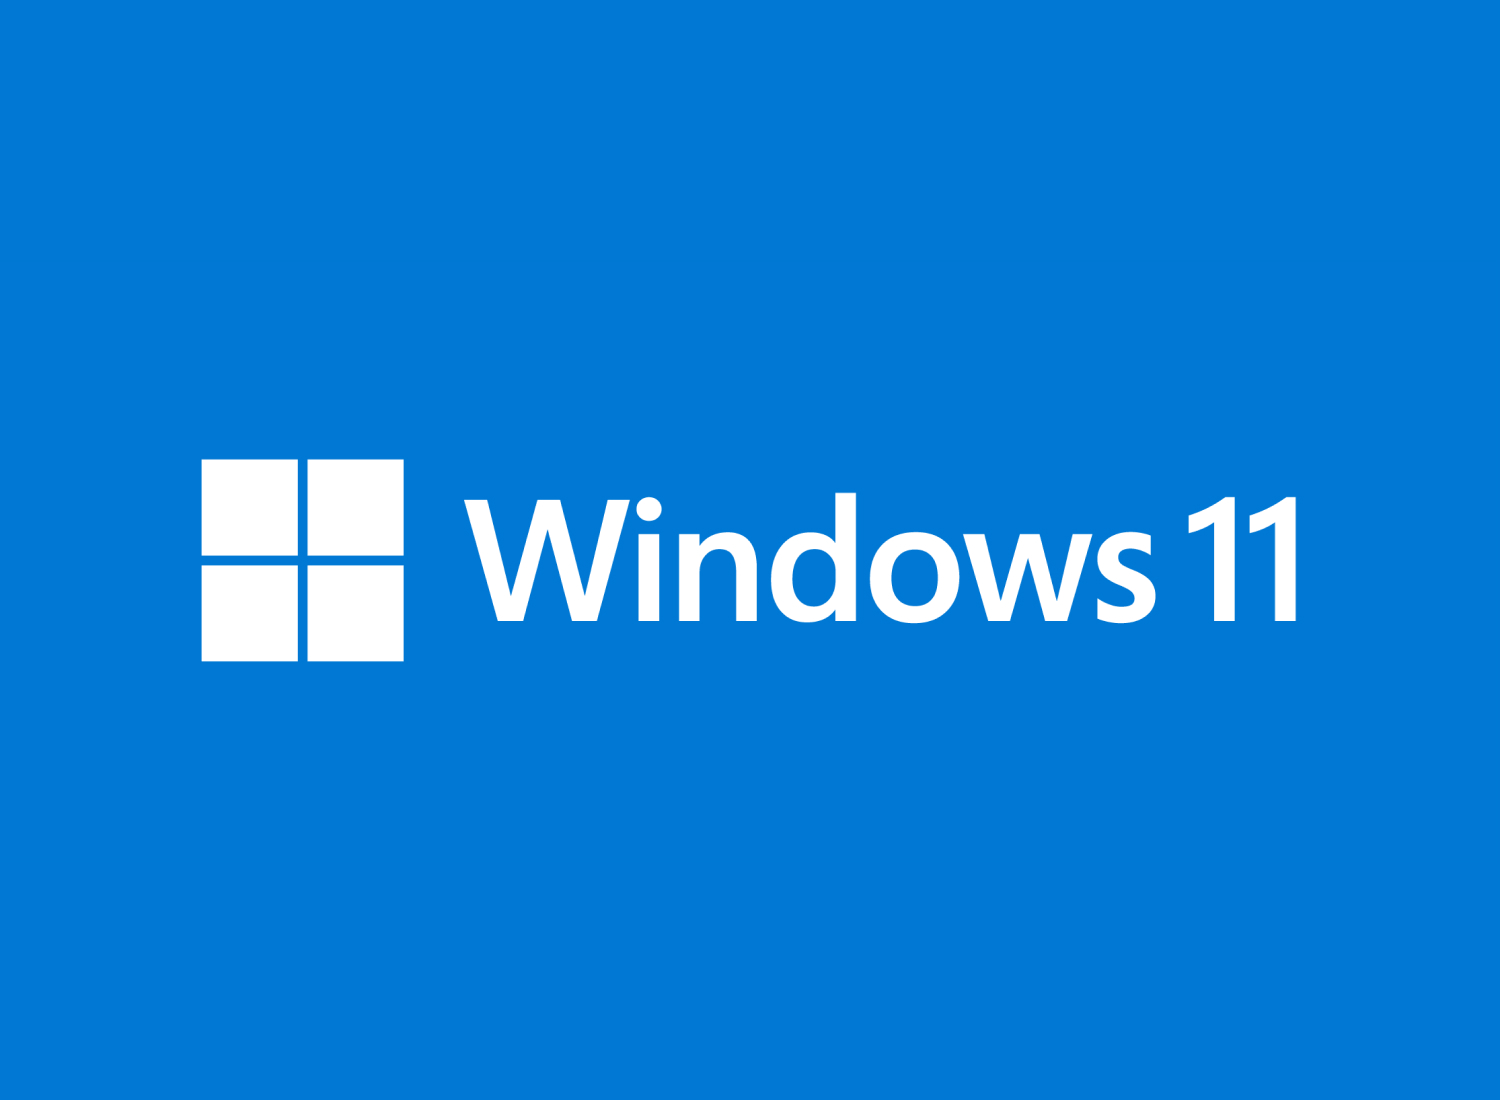 Announcing Windows 11 Insider Preview Build 22621.590 and 22622.590